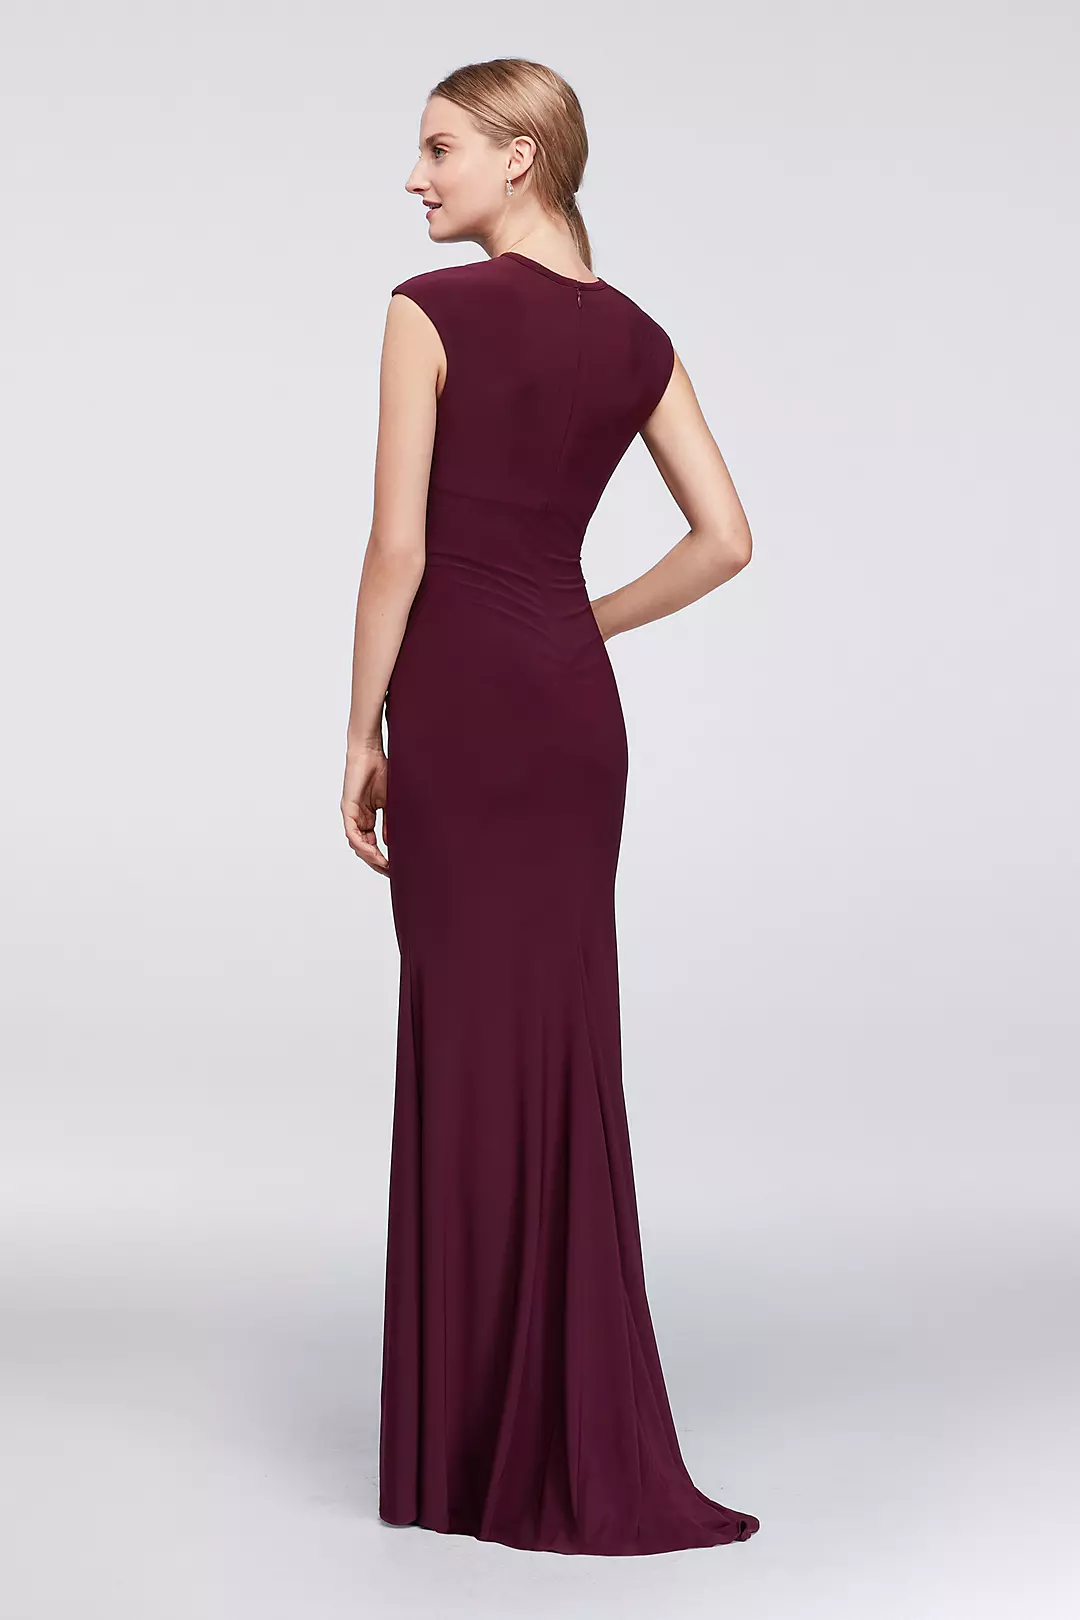 Ruched Sheath Dress With Cutout Neckline Image 2